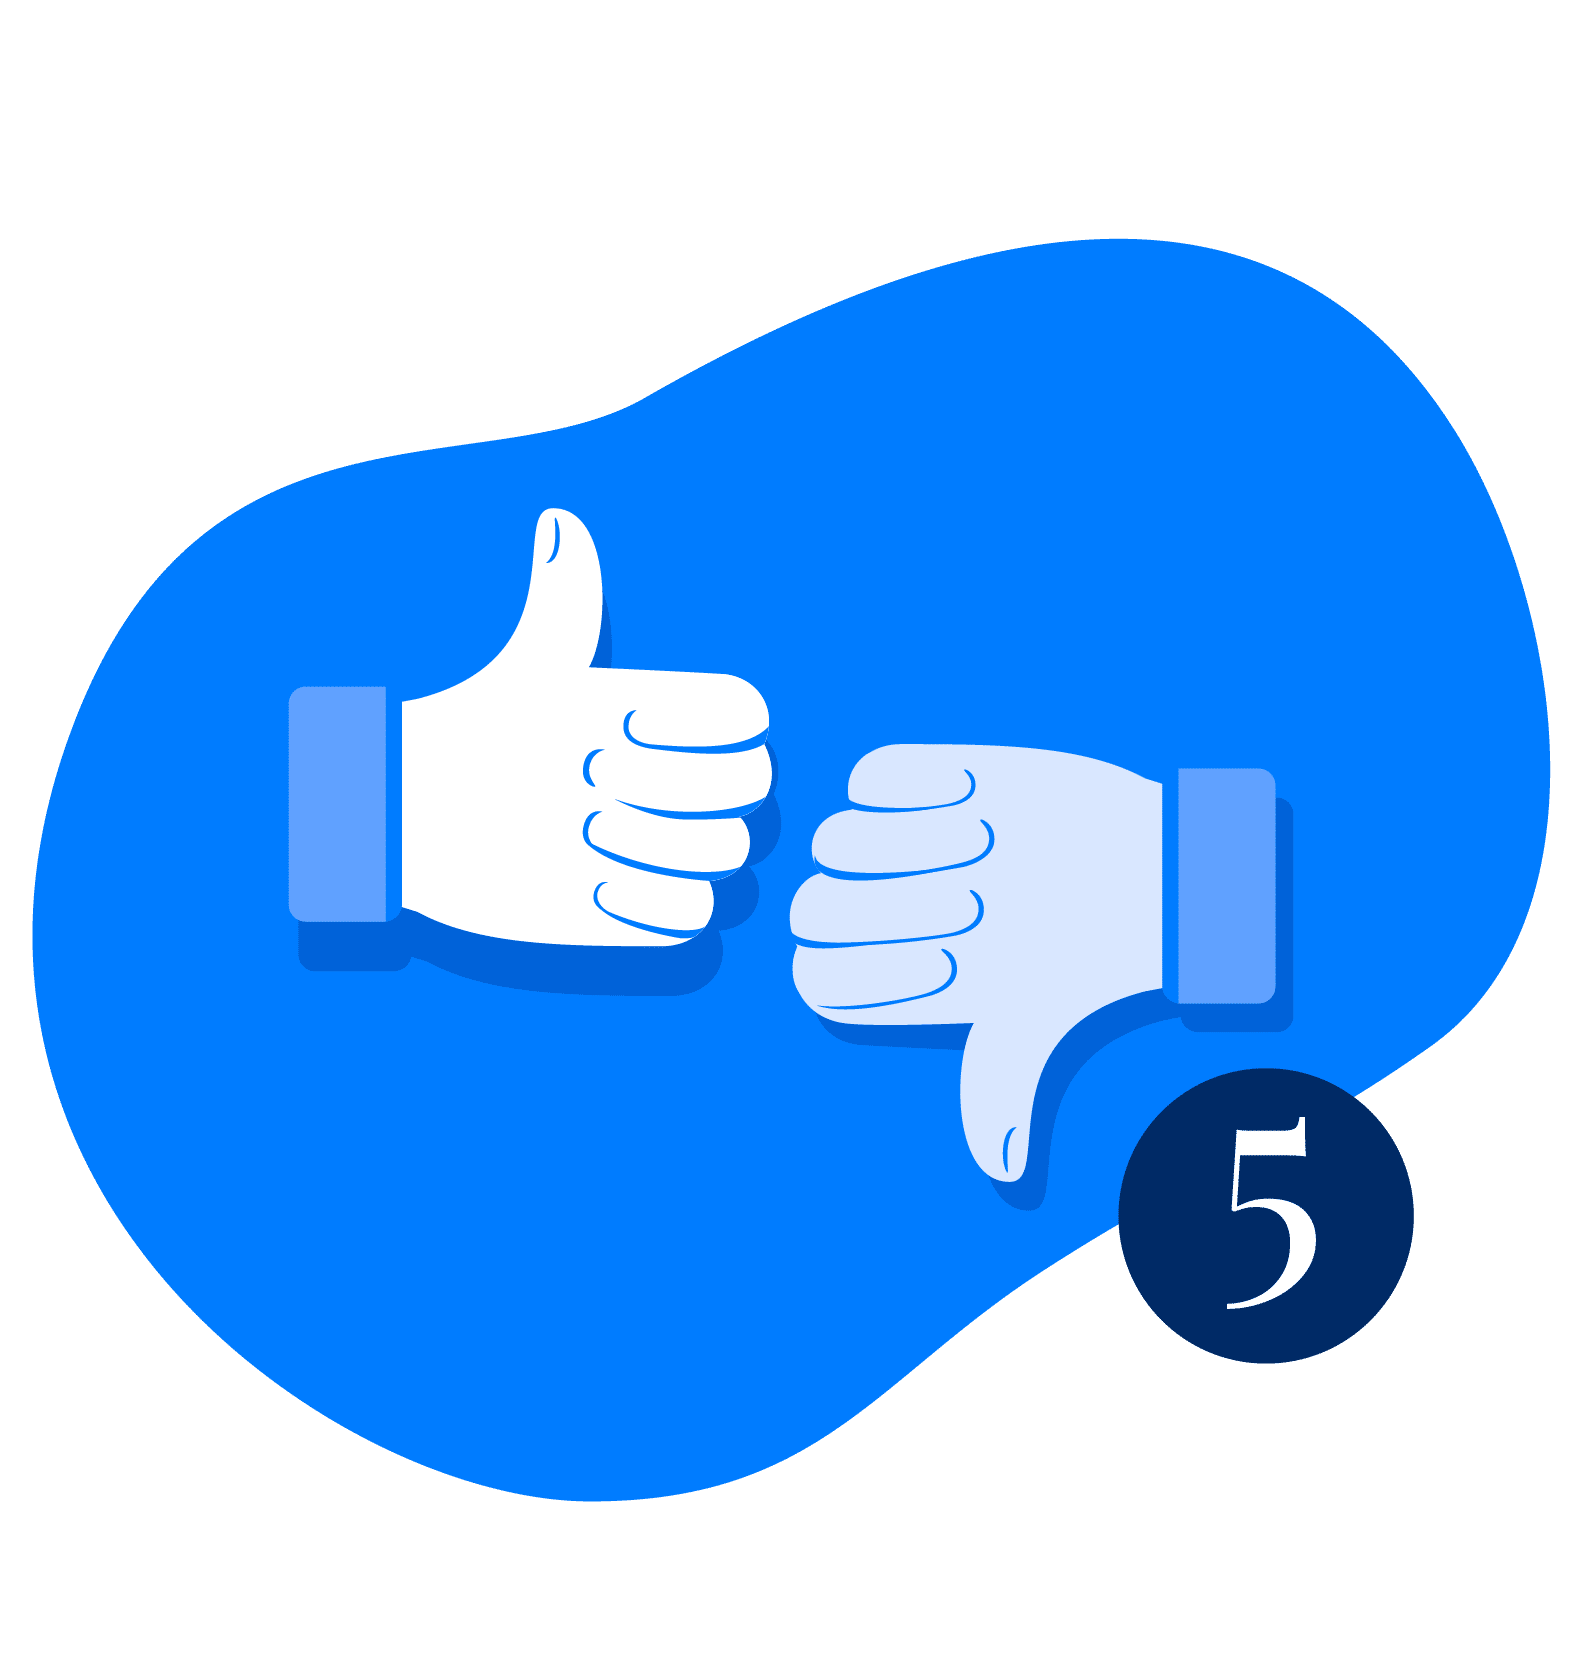 Test and train the AI, illustration of a thumbs-up and a thumbs-down